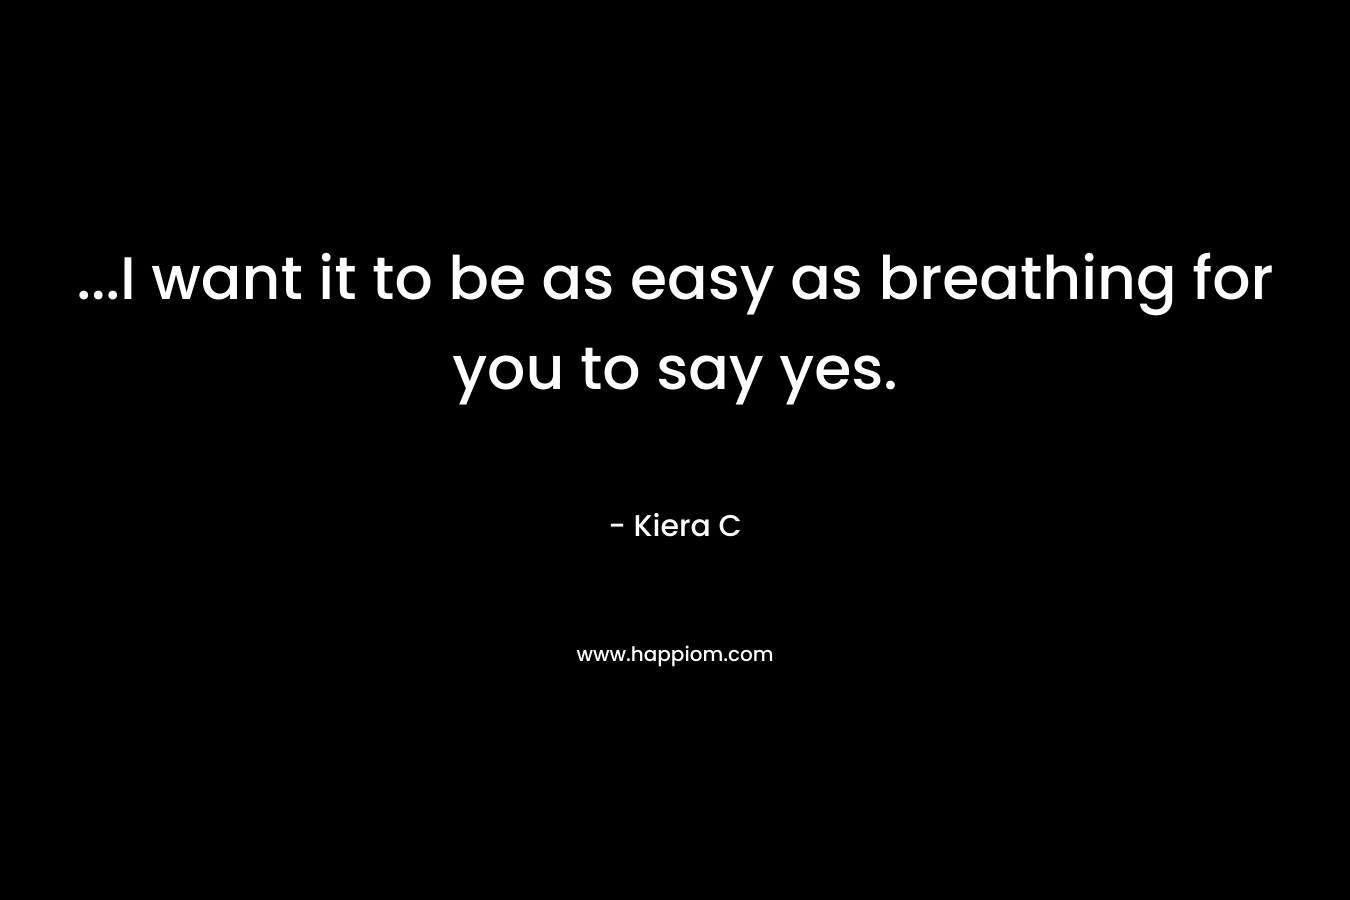 ...I want it to be as easy as breathing for you to say yes.